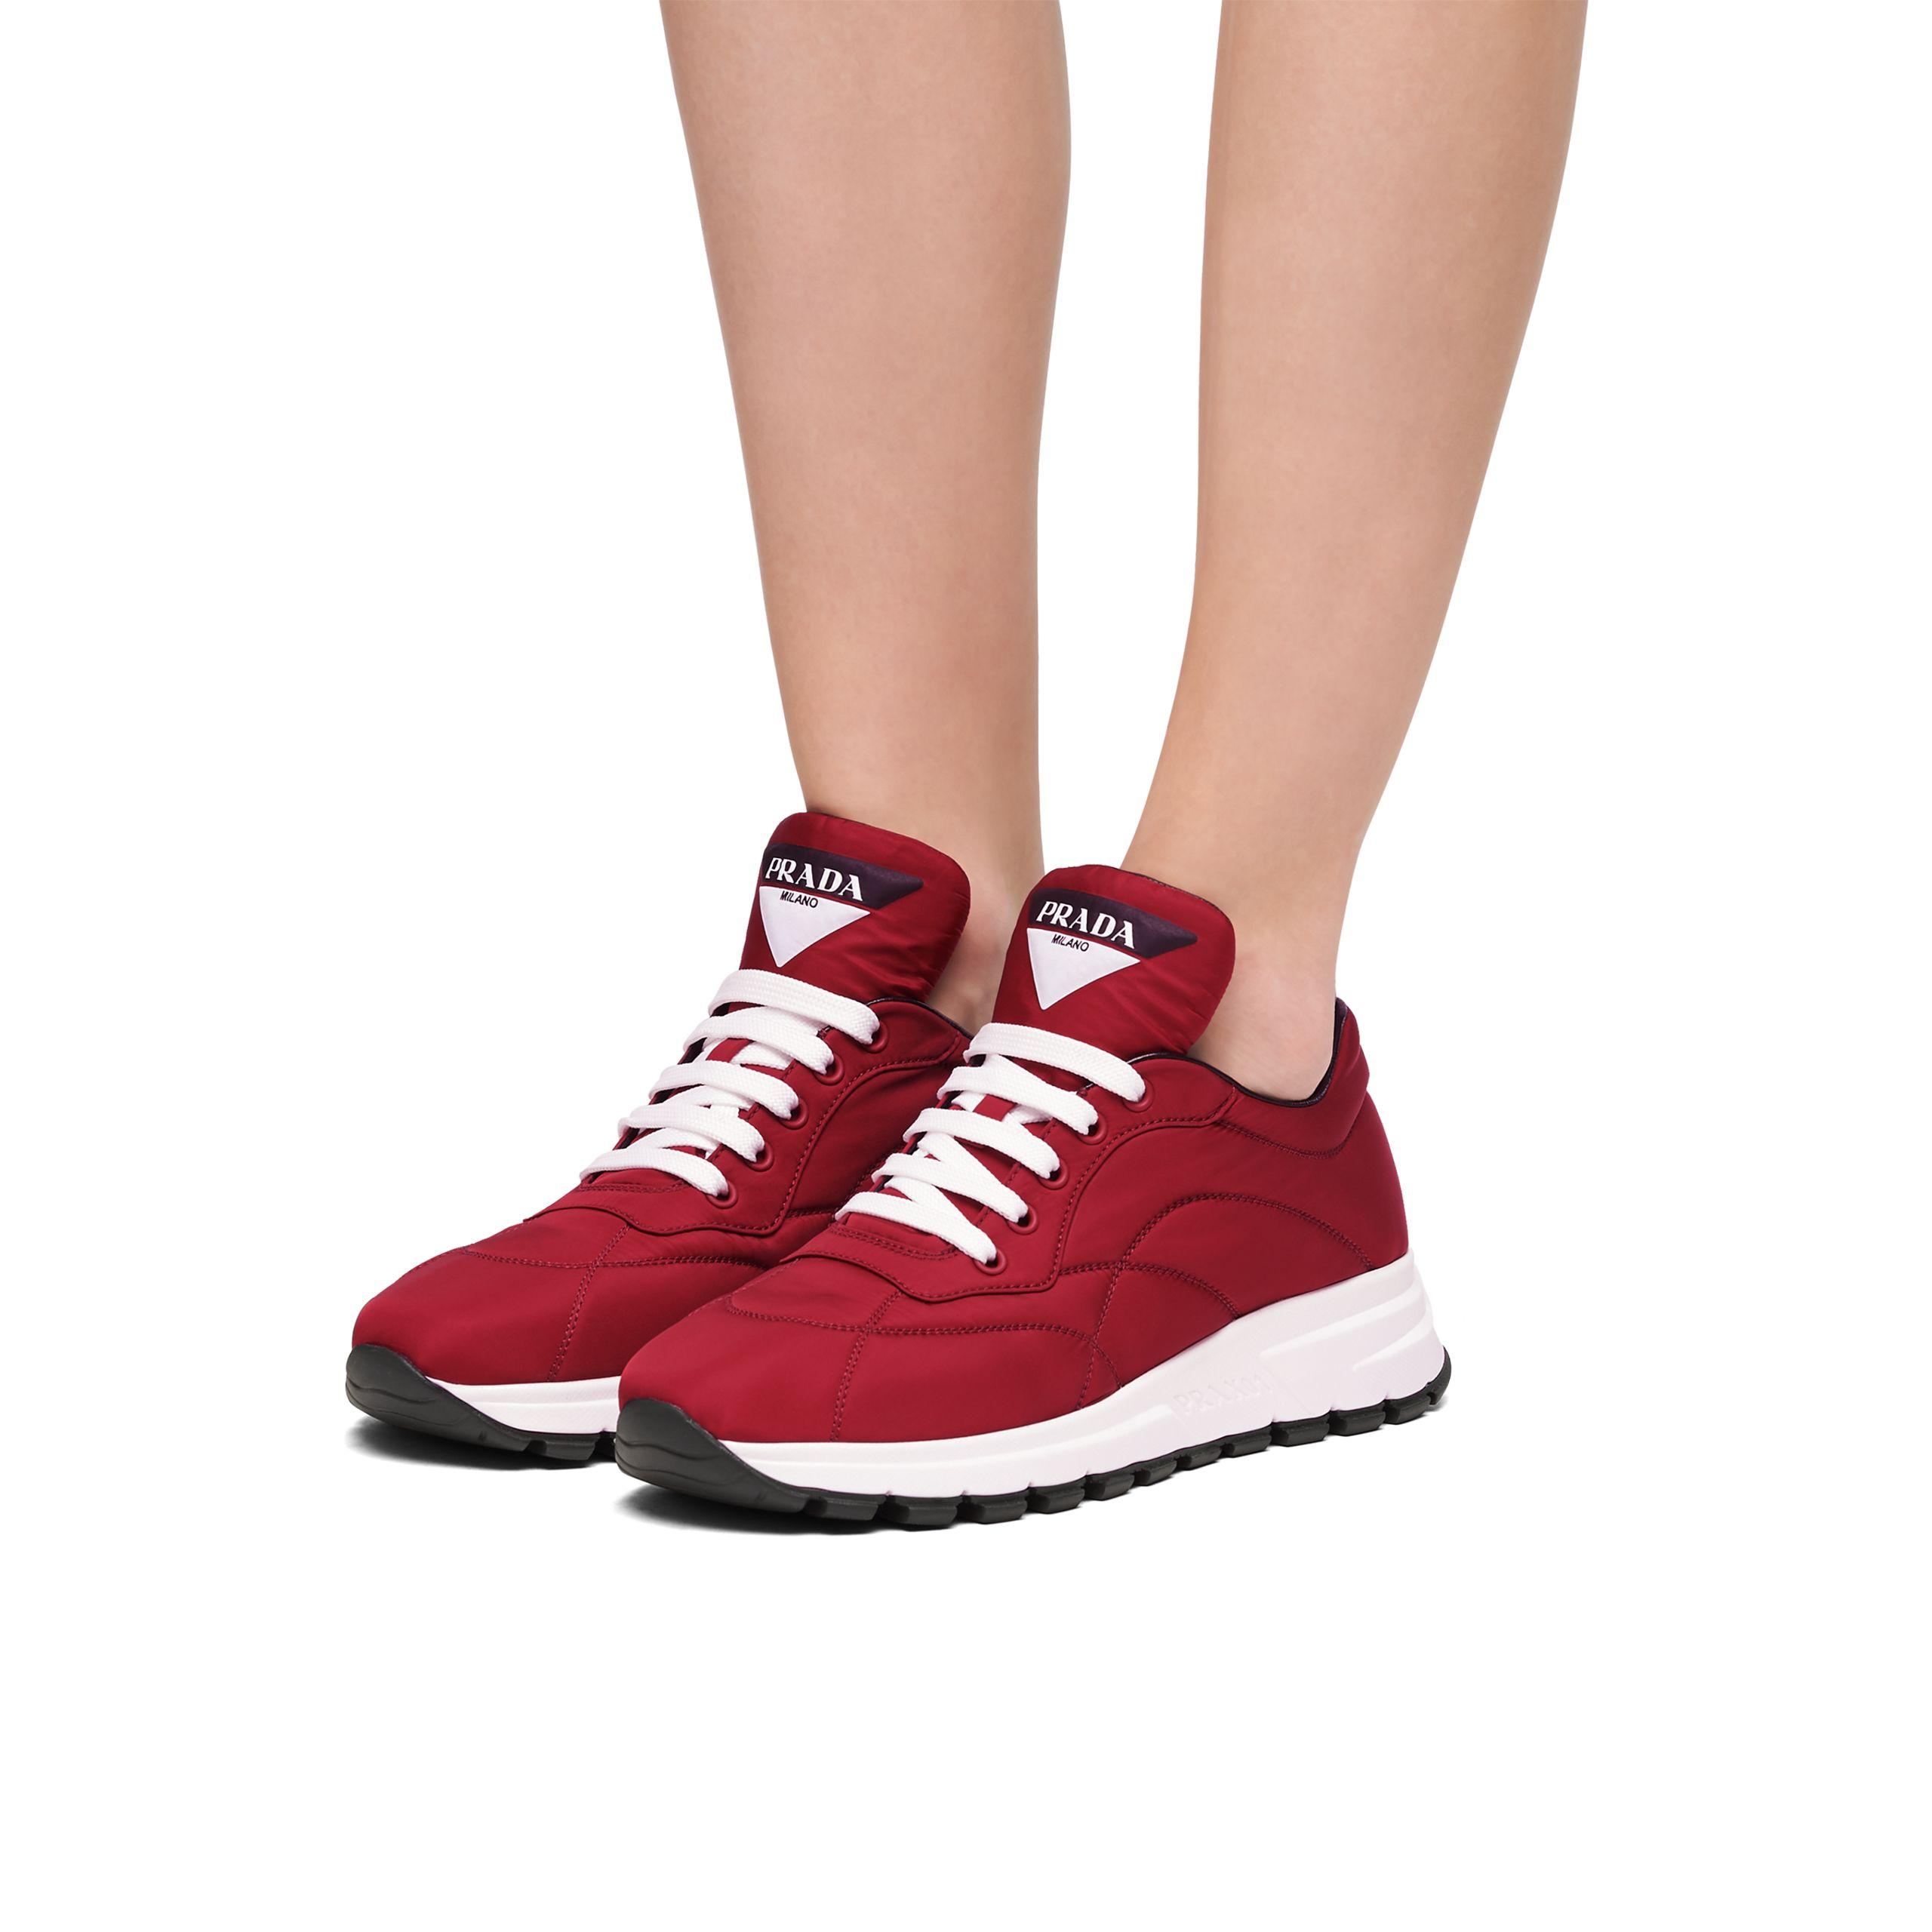 Prada Synthetic Nylon Sneakers in Red | Lyst